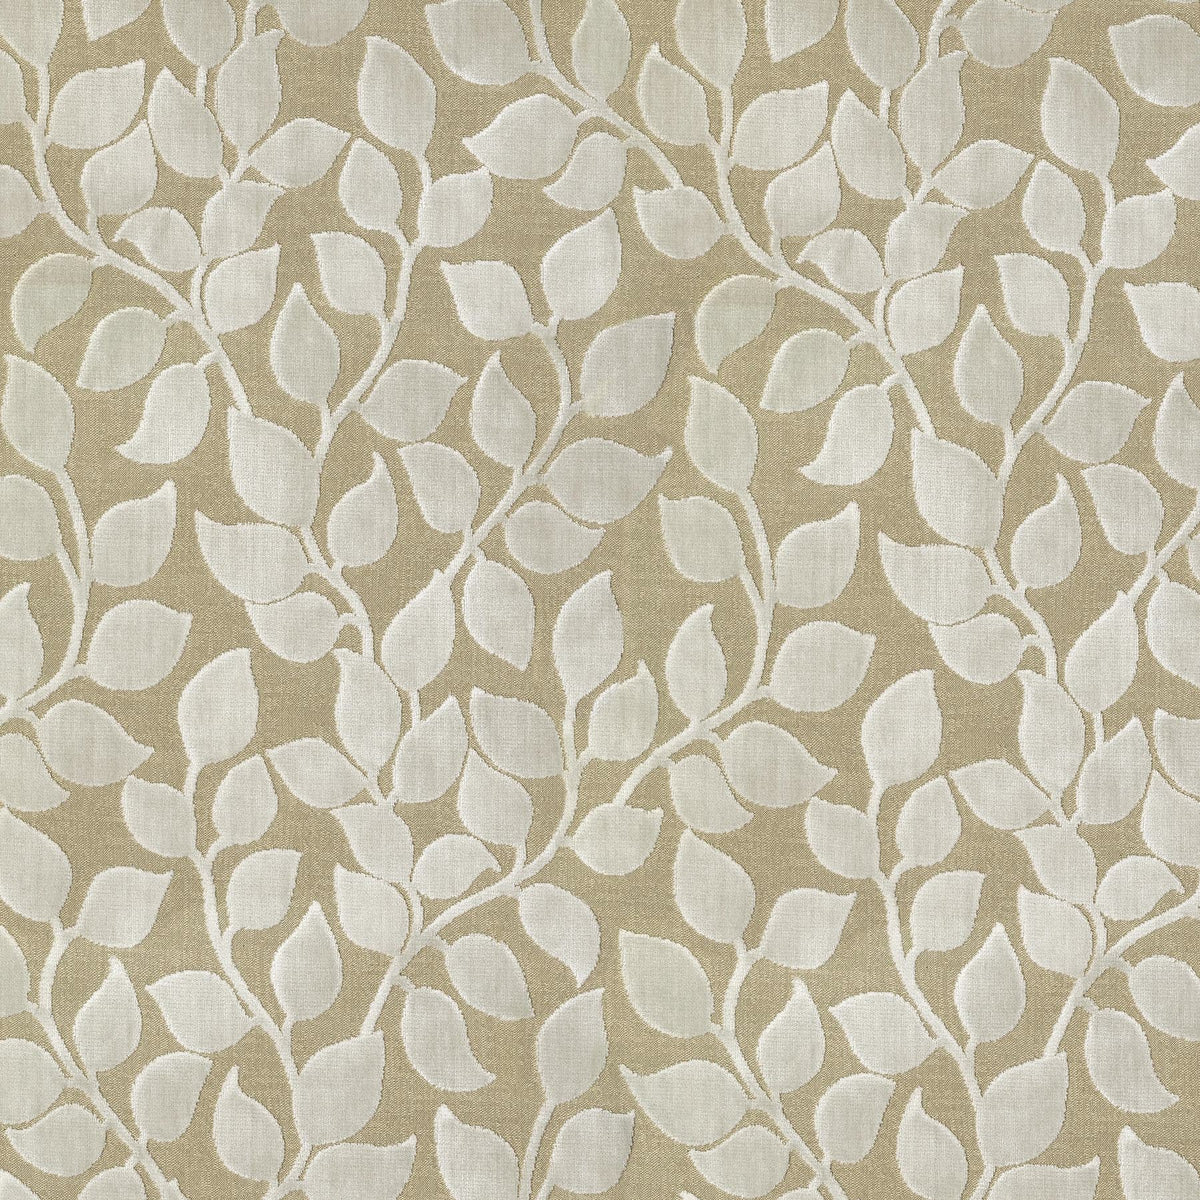 P/K Lifestyles Lovely Leaf - Cloud 411267 Upholstery Fabric